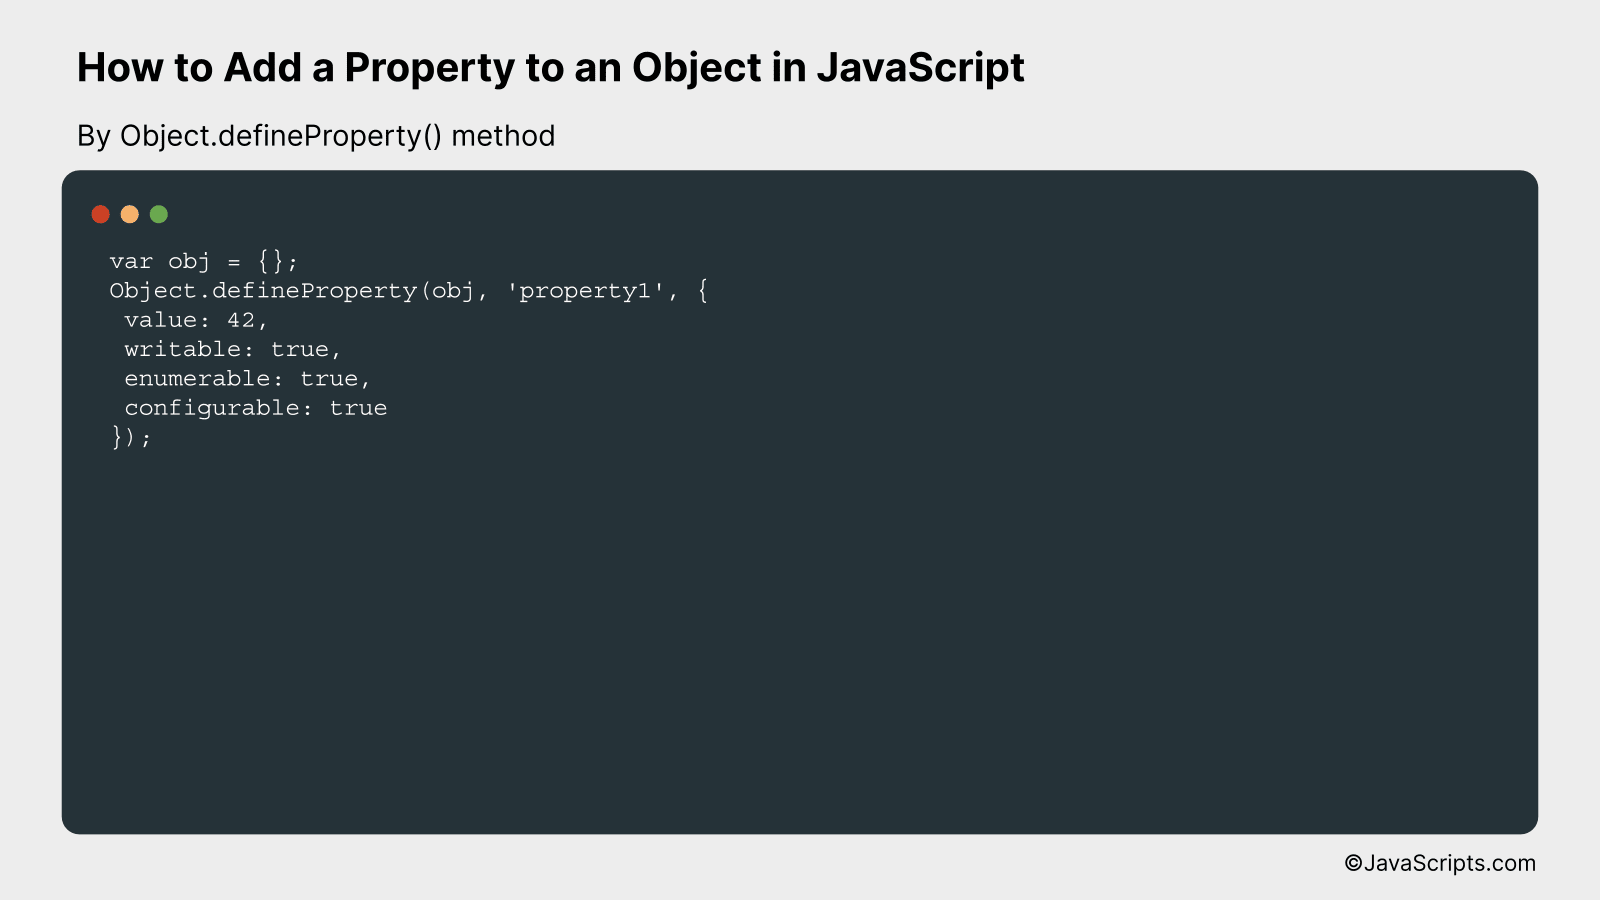 By Object.defineProperty() method